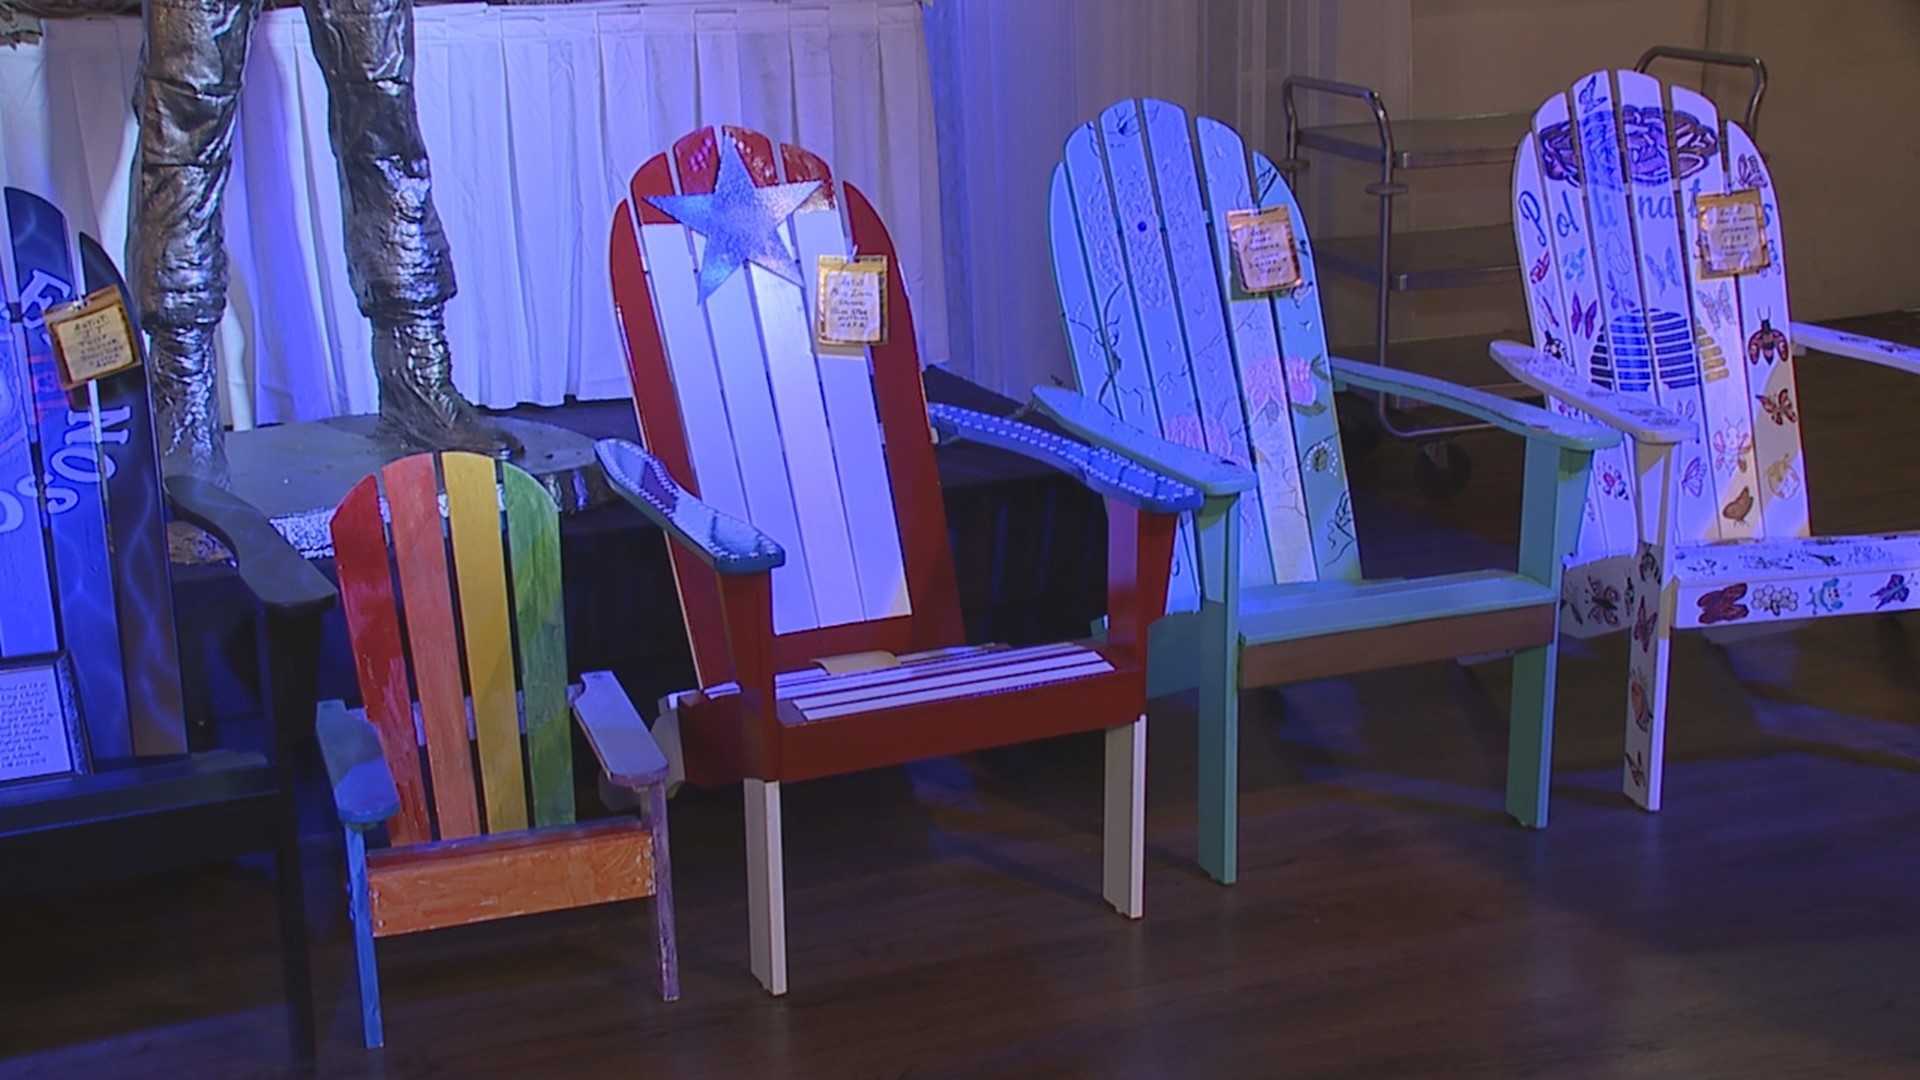 Artists used their creative expression to design Adirondack chairs that are up for auction.